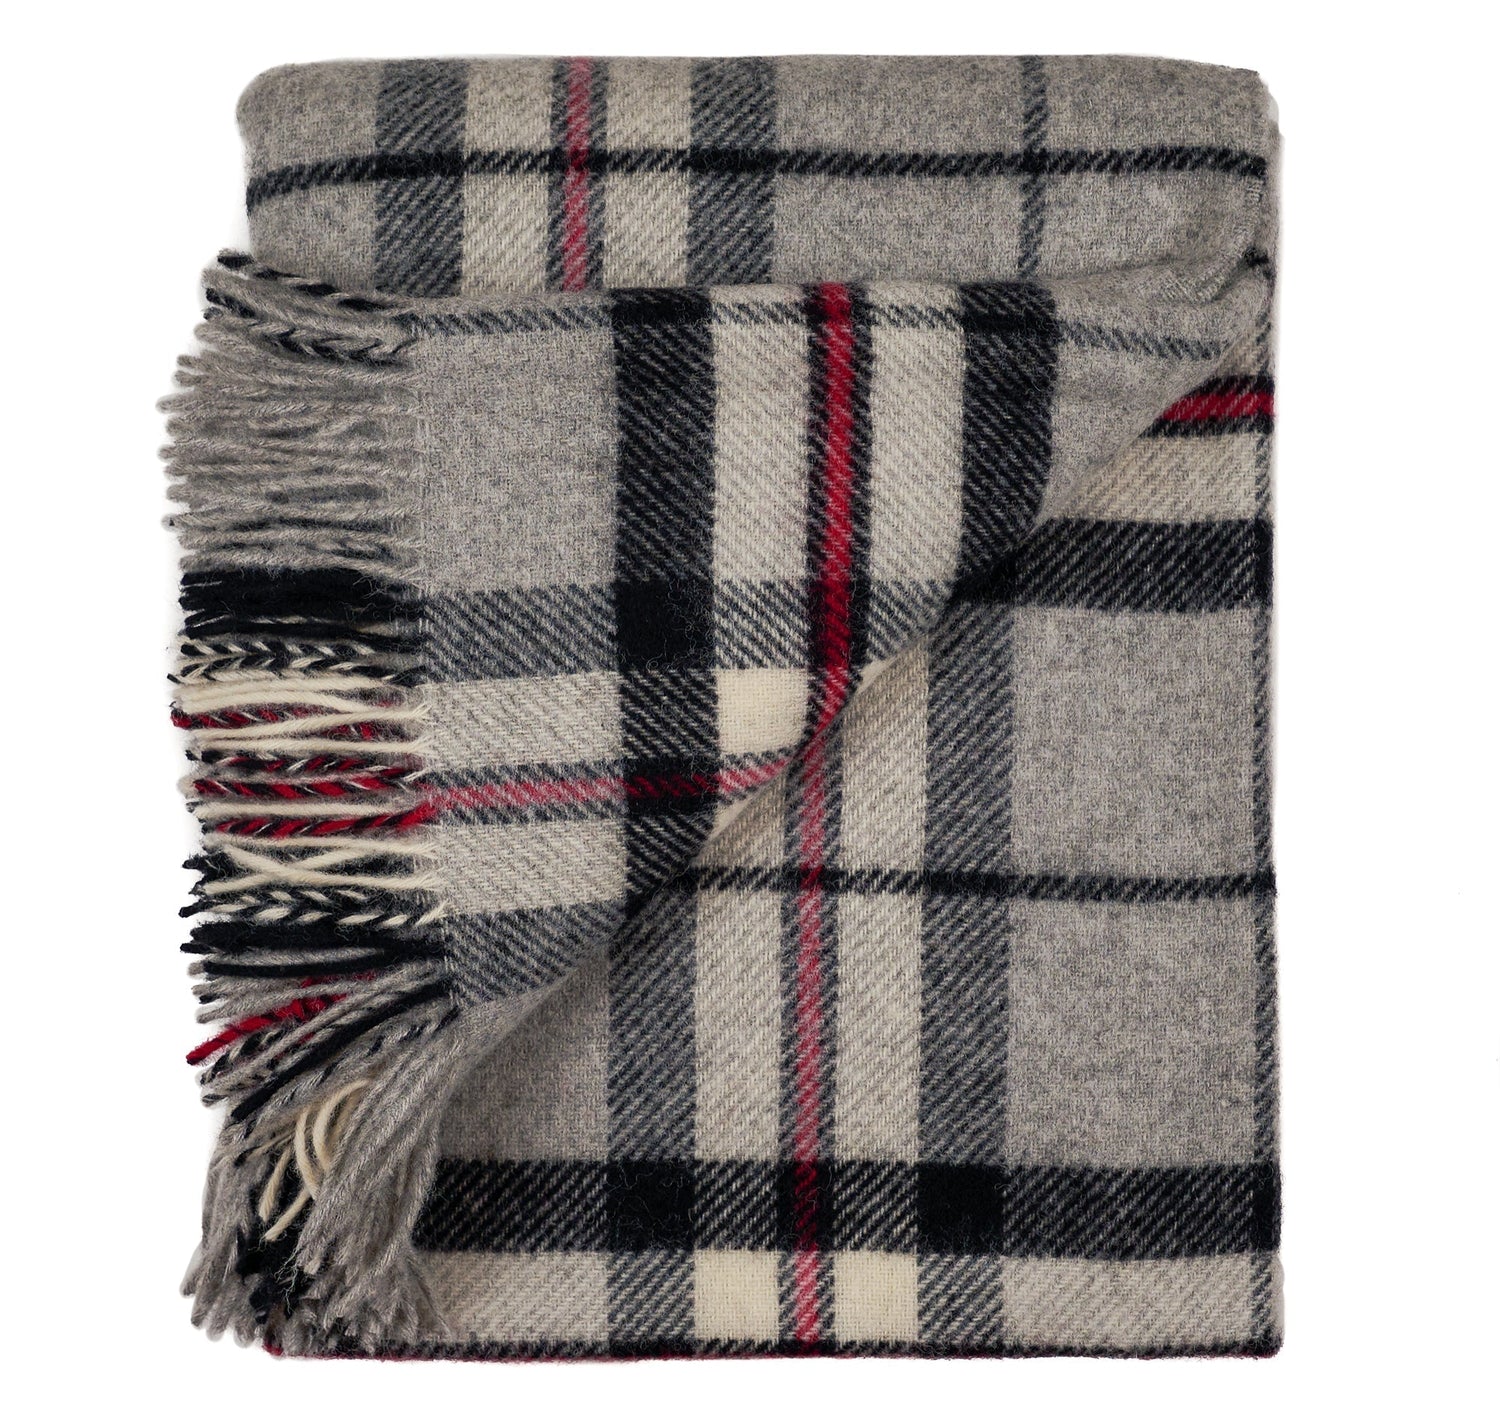 Prince of Scots Highland Tweed Pure New Wool Throw (Grey Thompson)-Throws and Blankets-810032752057-J4050028-005-Prince of Scots